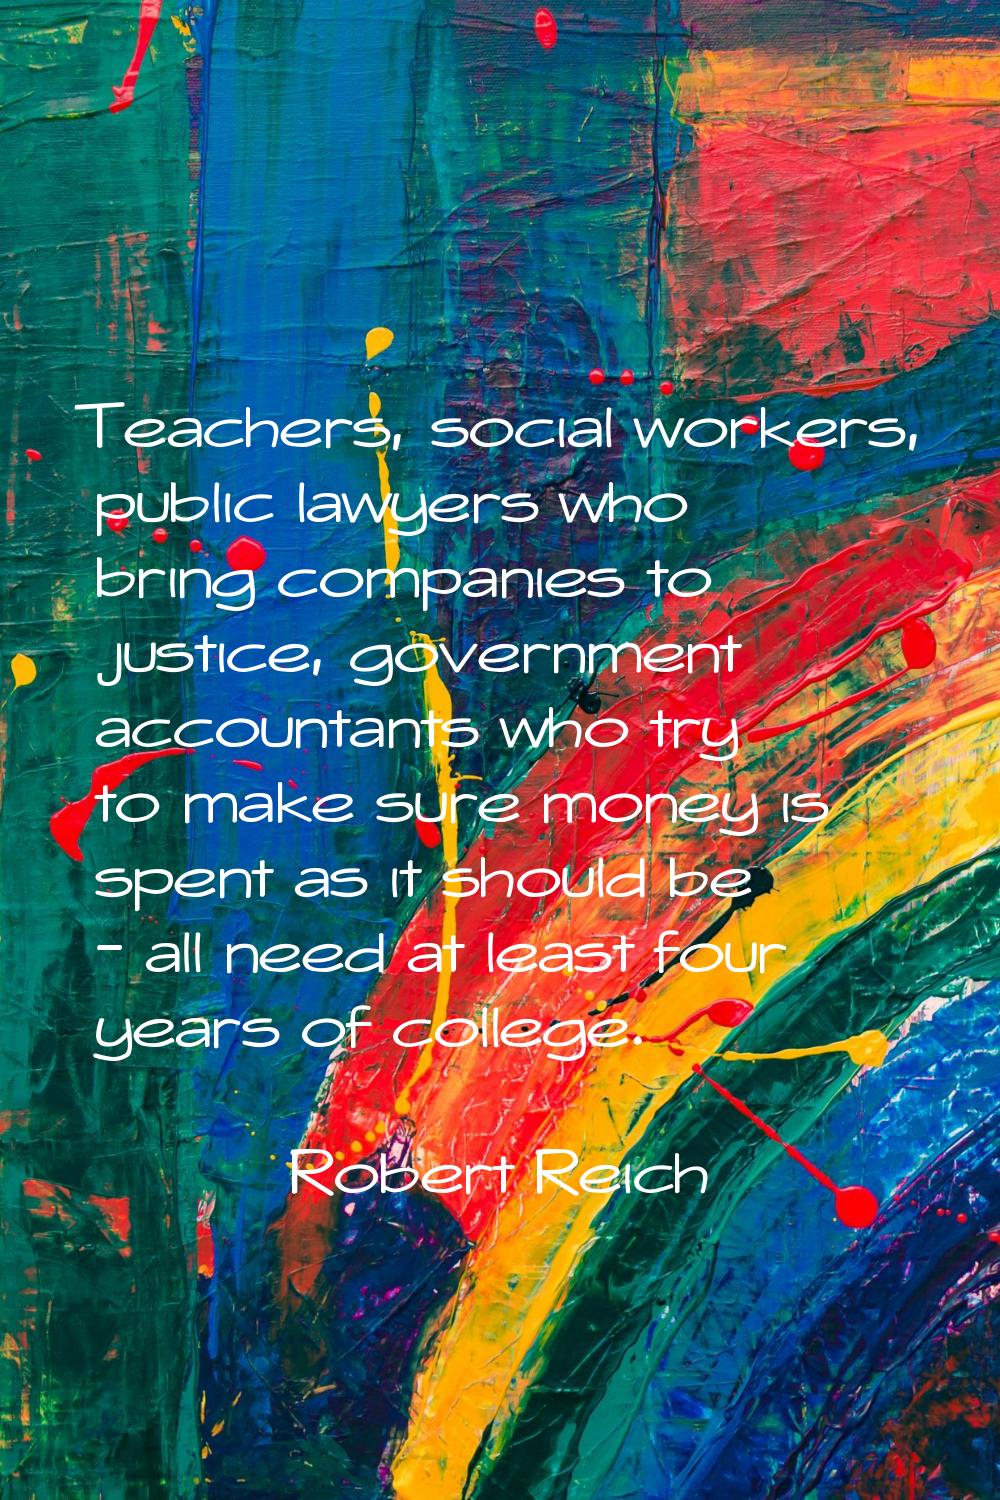 Teachers, social workers, public lawyers who bring companies to justice, government accountants who